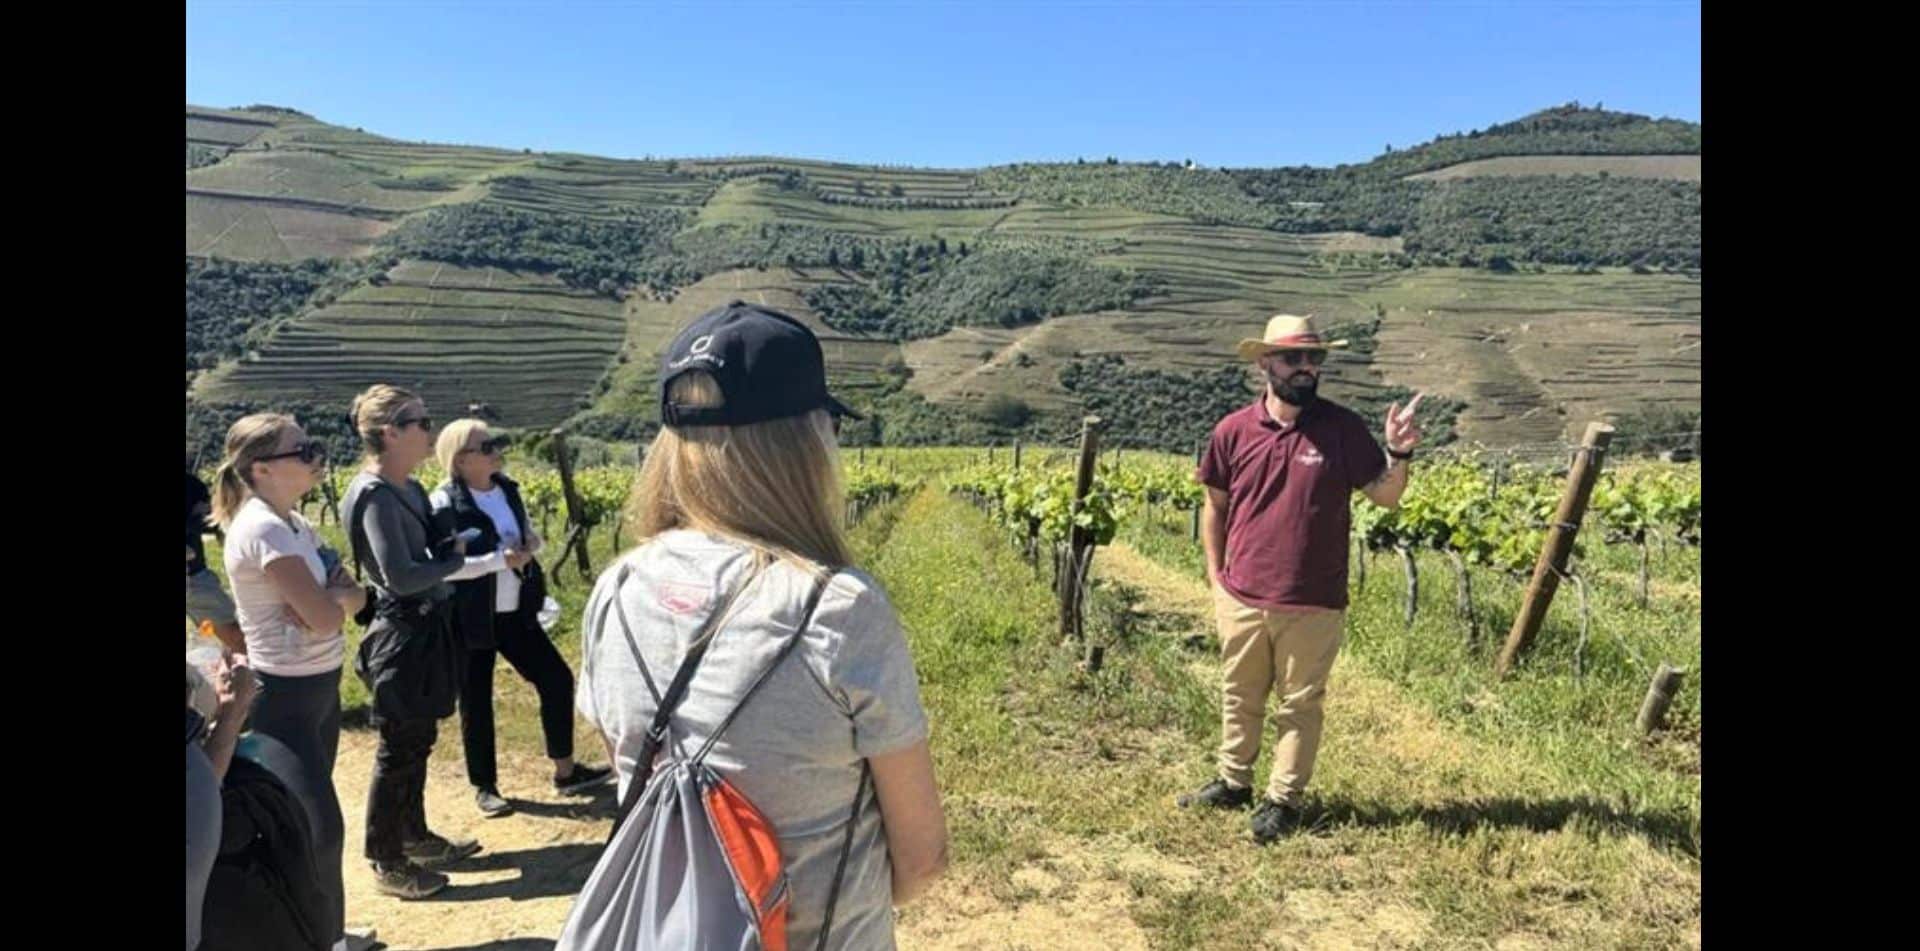 Sip and stroll through Douro Valley's vineyards